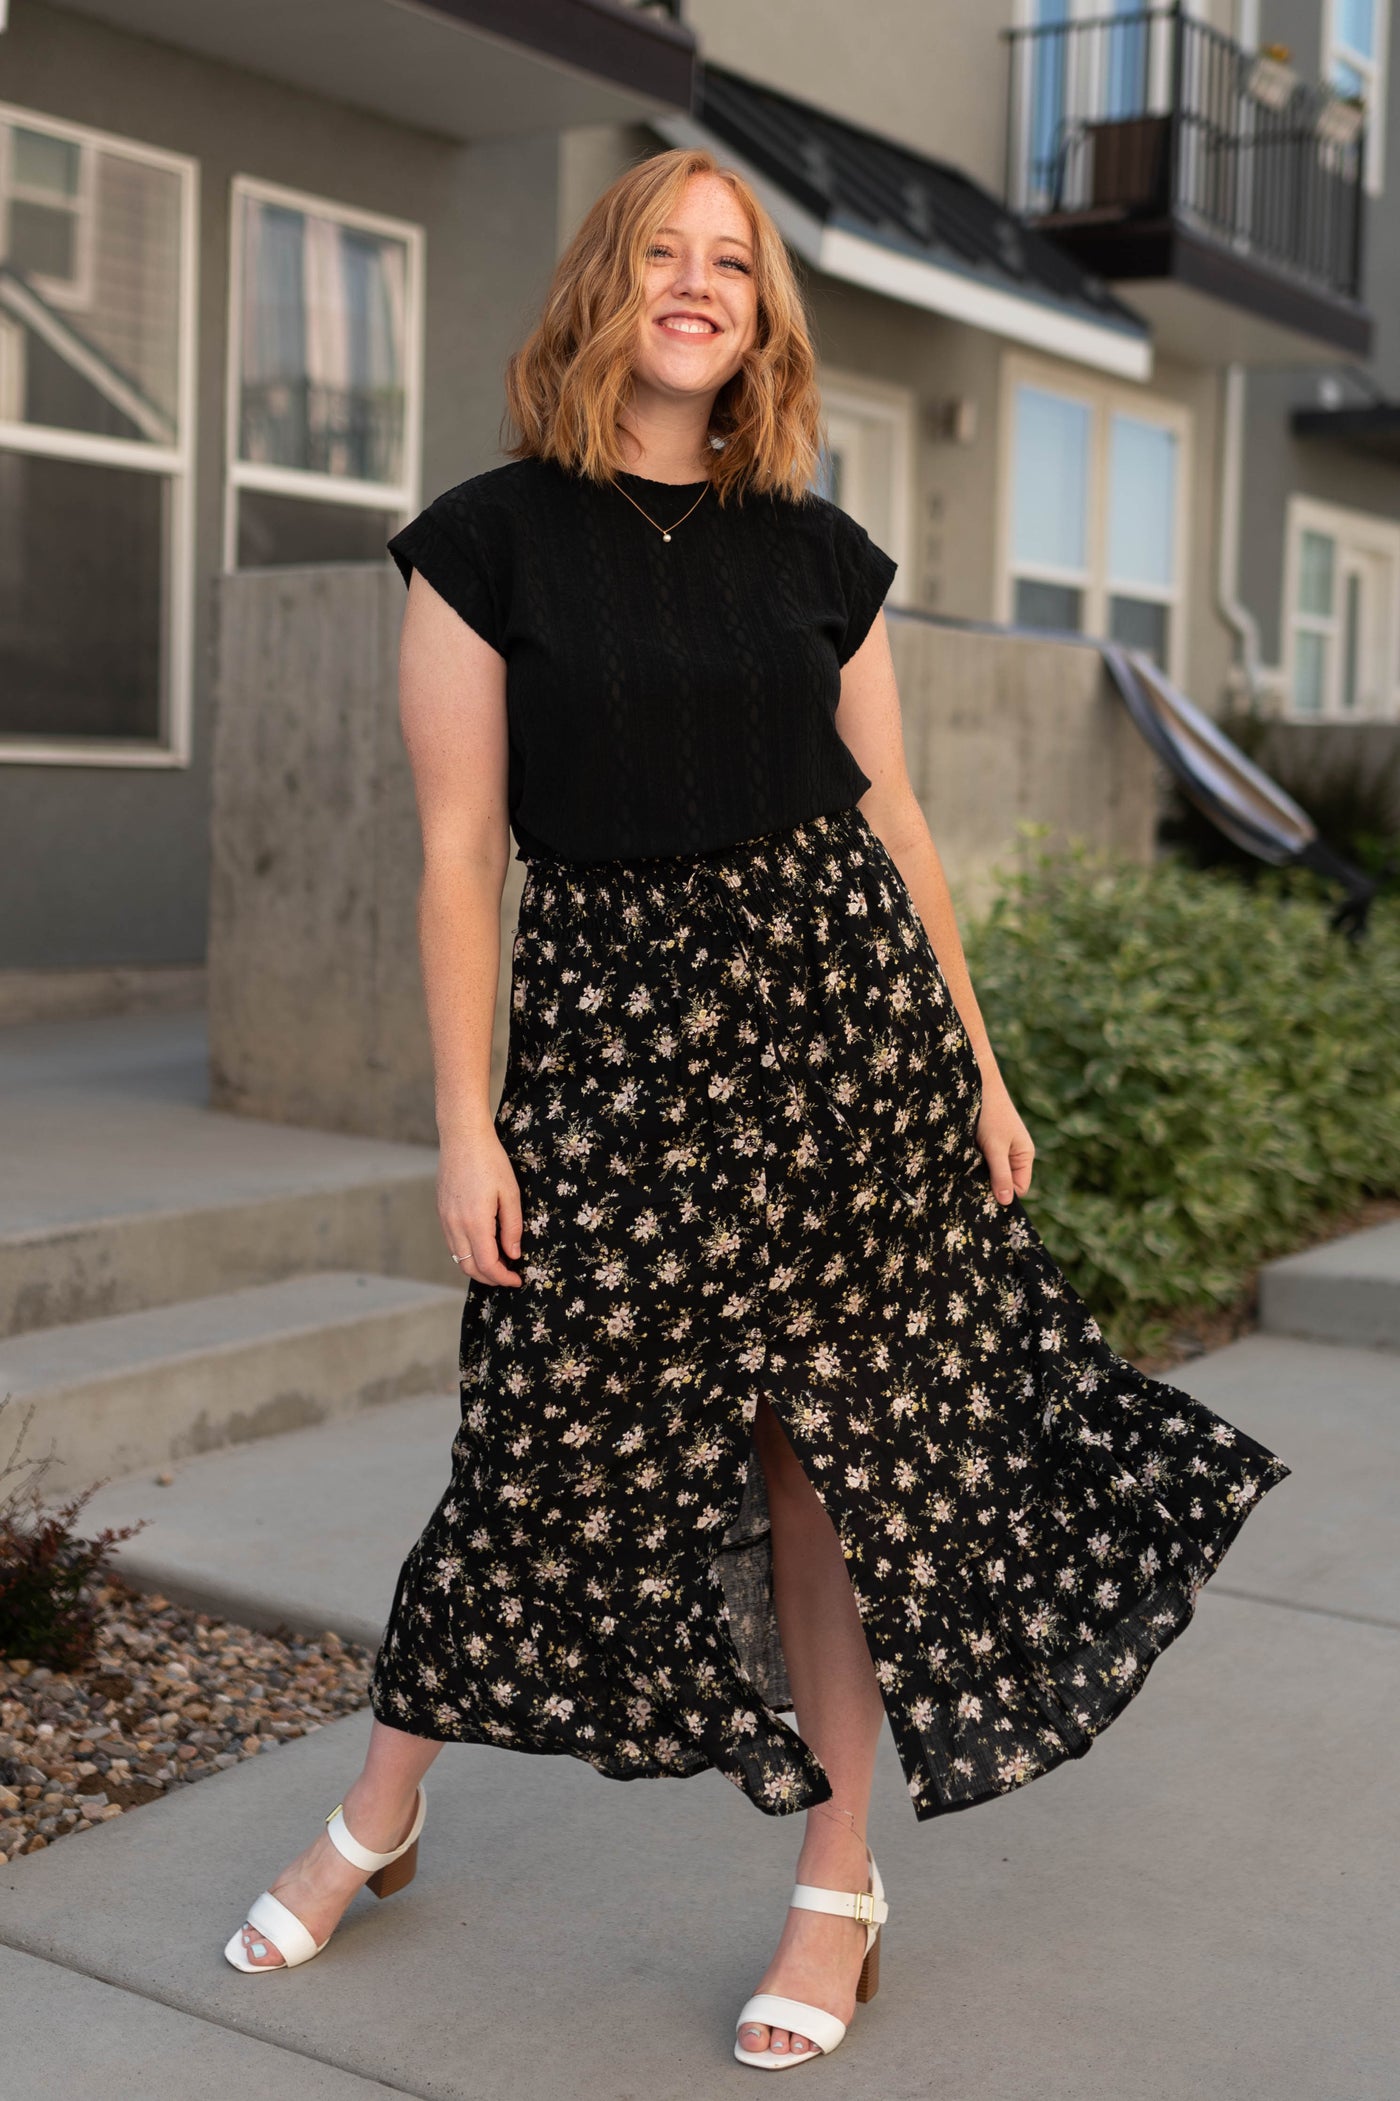 Cap sleeve black top with black floral skirt that is sold separately